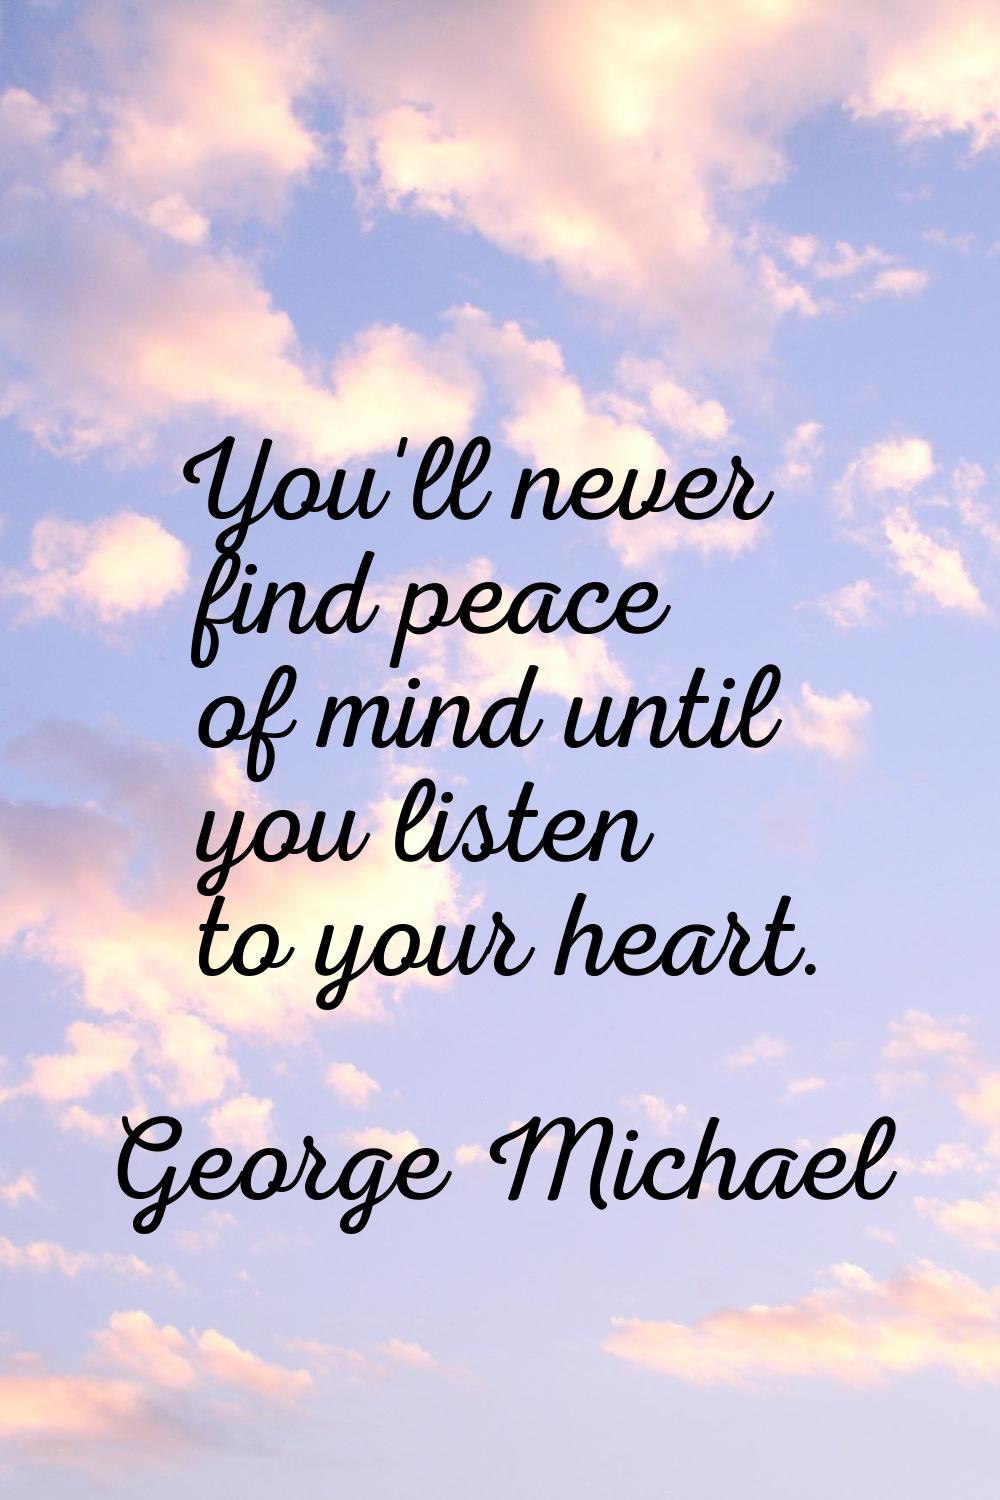 You'll never find peace of mind until you listen to your heart.